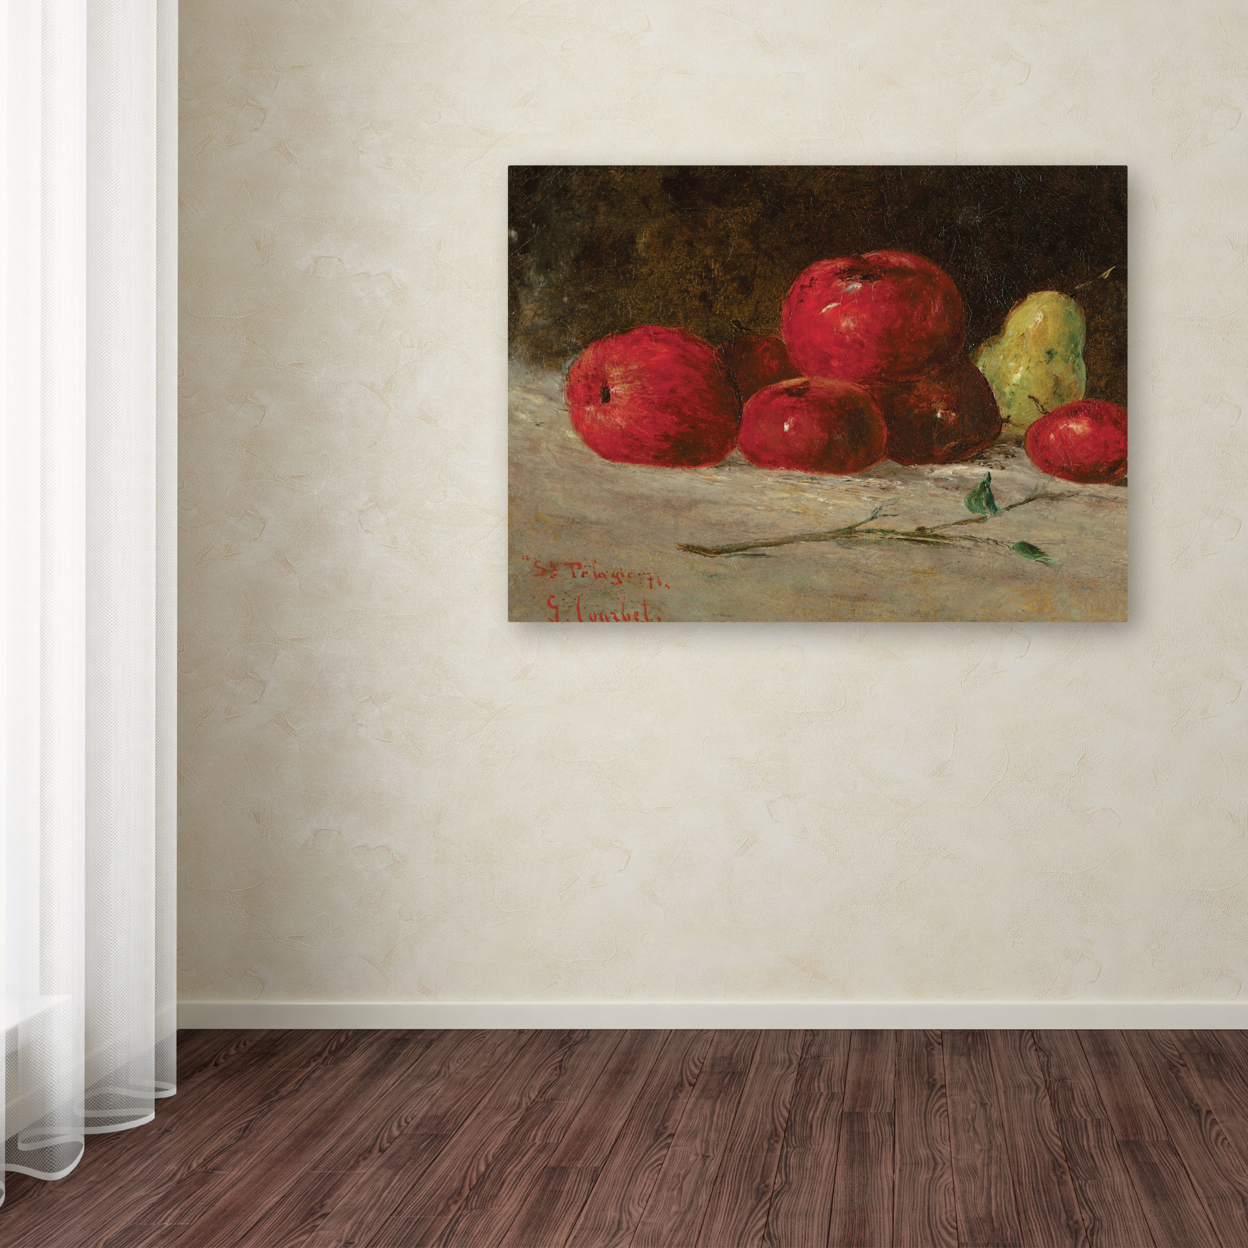 Gustave Courbet 'Still Life Apples And Pears' Canvas Art 18 X 24